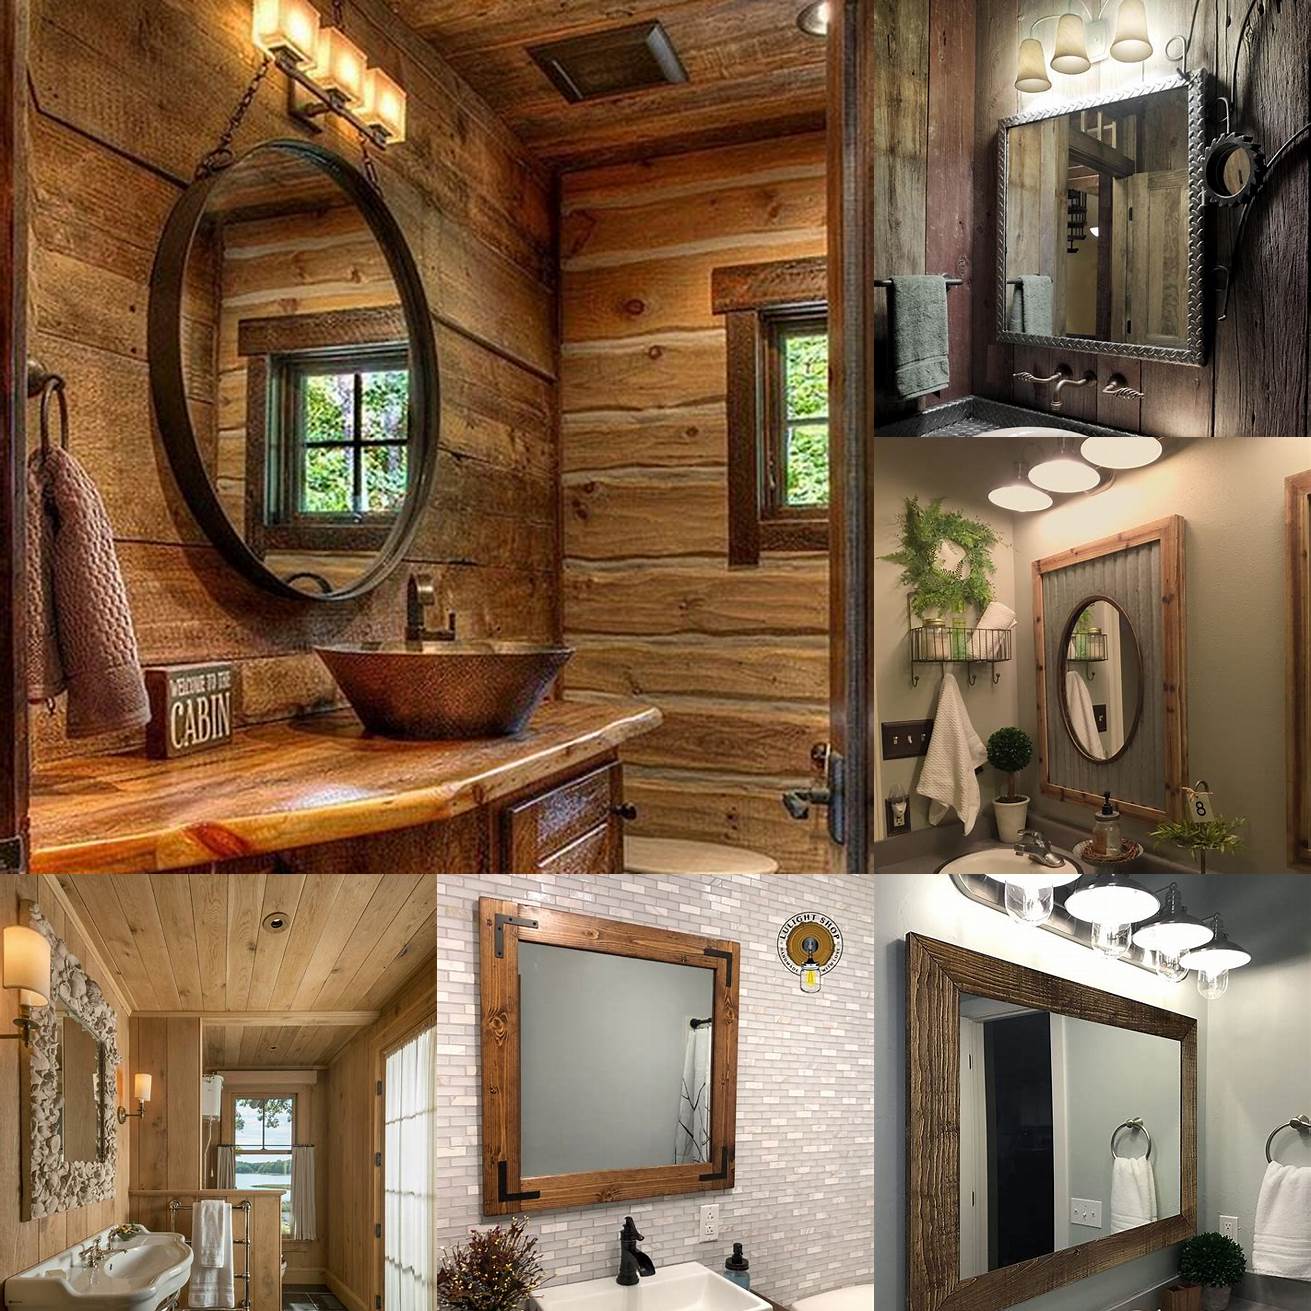 Rustic mirrors give a warm and cozy feel to your bathroom